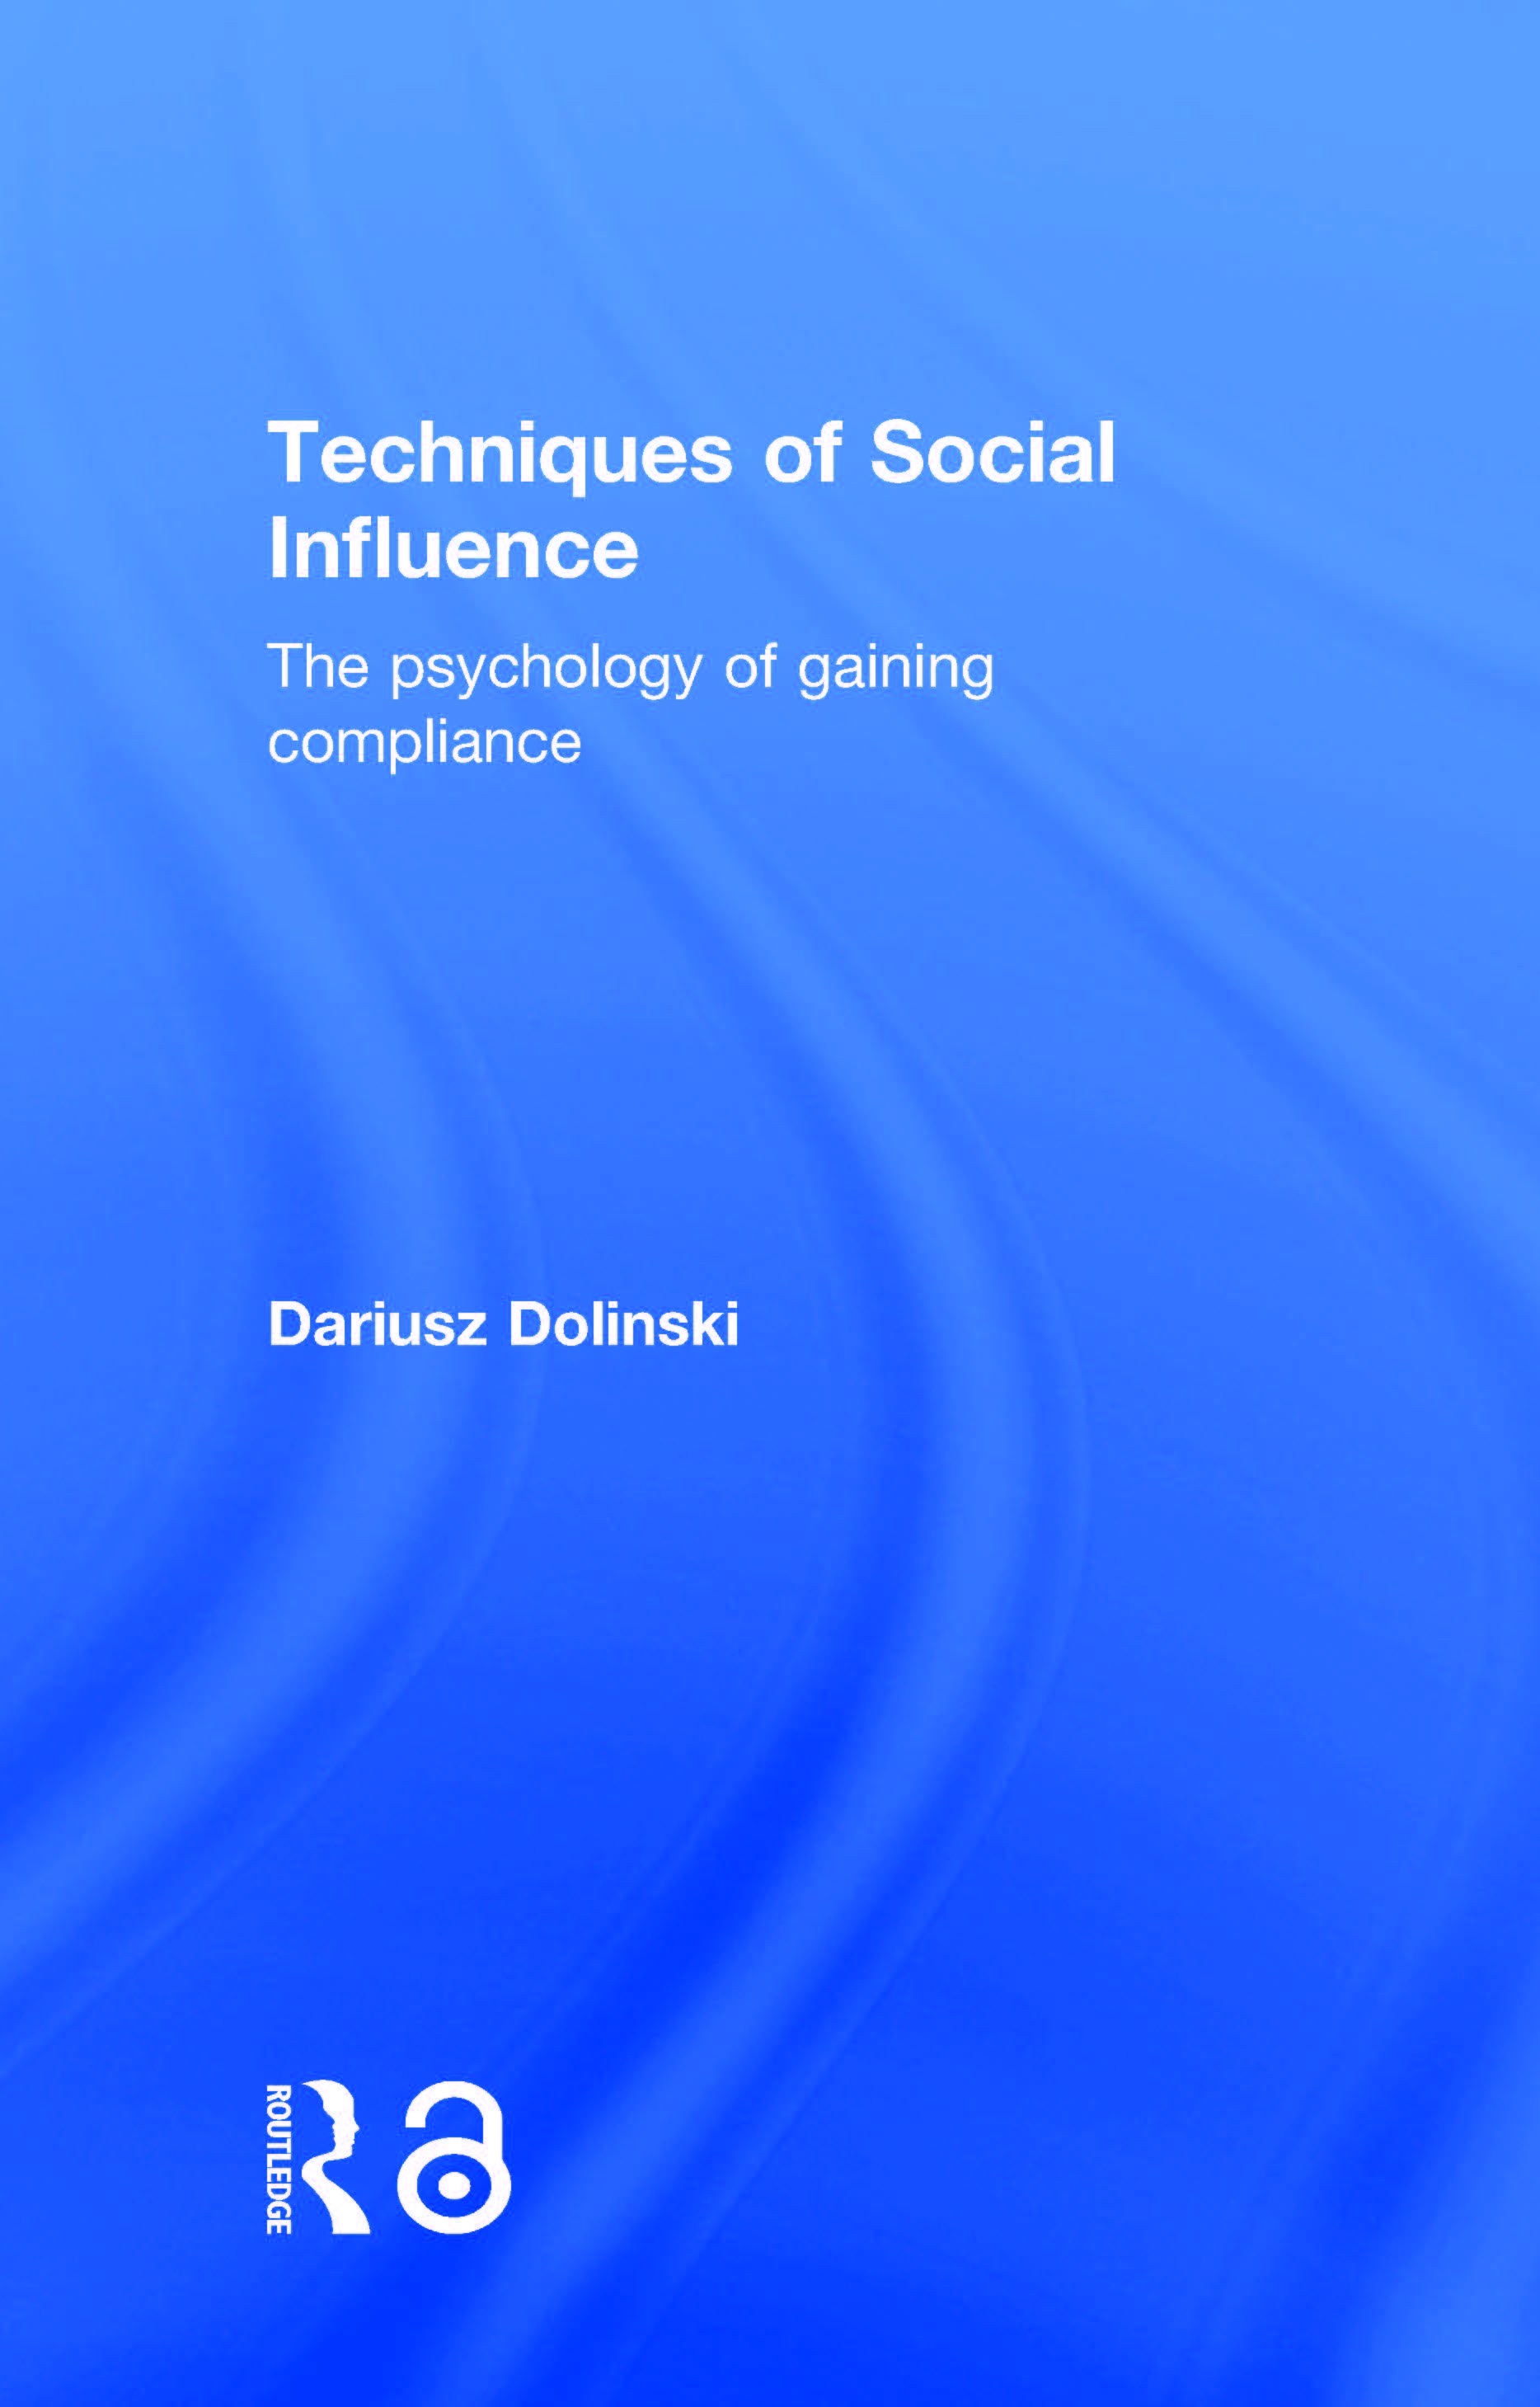 Techniques of Social Influence: The Psychology of Gaining Compliance